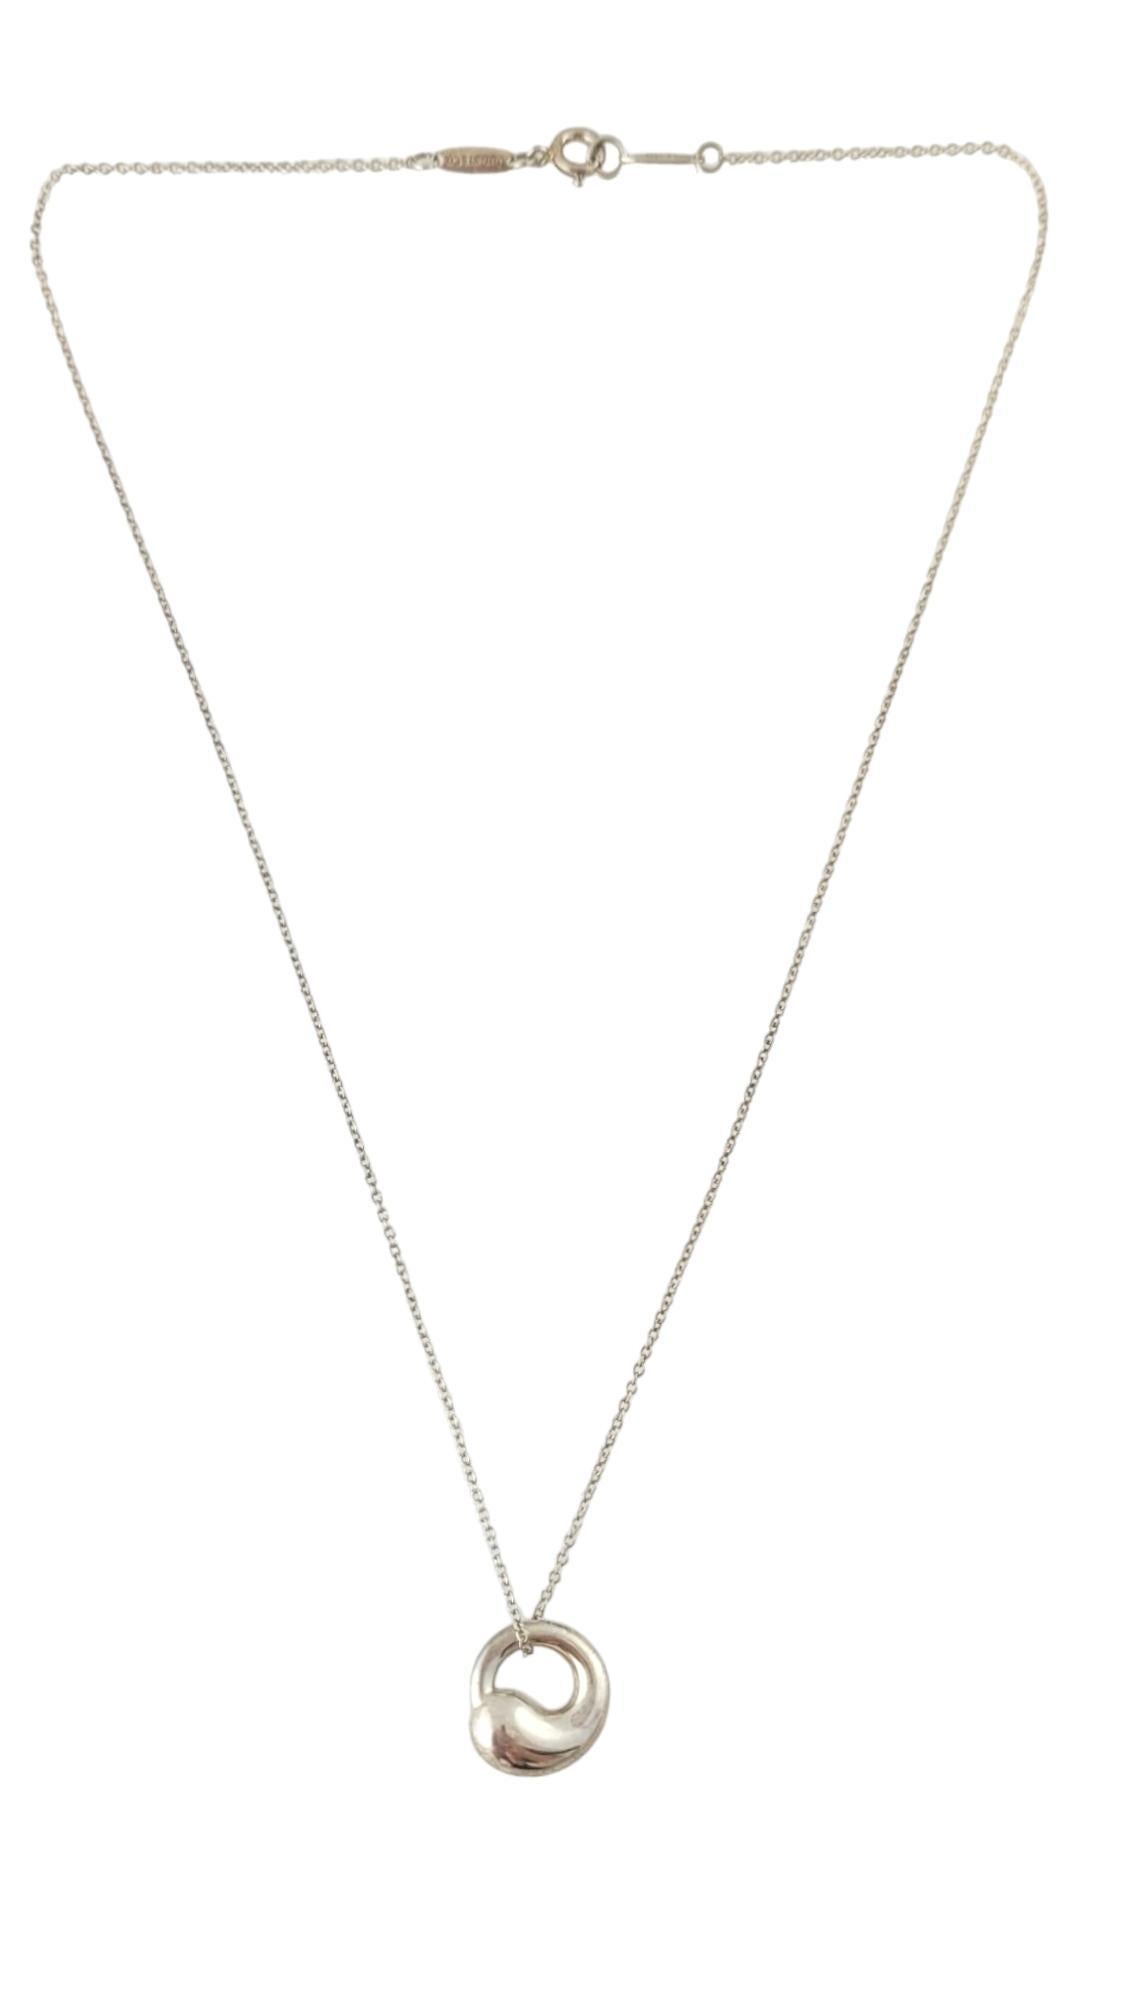 Tiffany & Co. Sterling Silver Eternal Circle Necklace

This gorgeous piece by Tiffany & Co. features a beautiful sterling eternity circle pendant paired with a sterling silver chain!

Chain length: 16